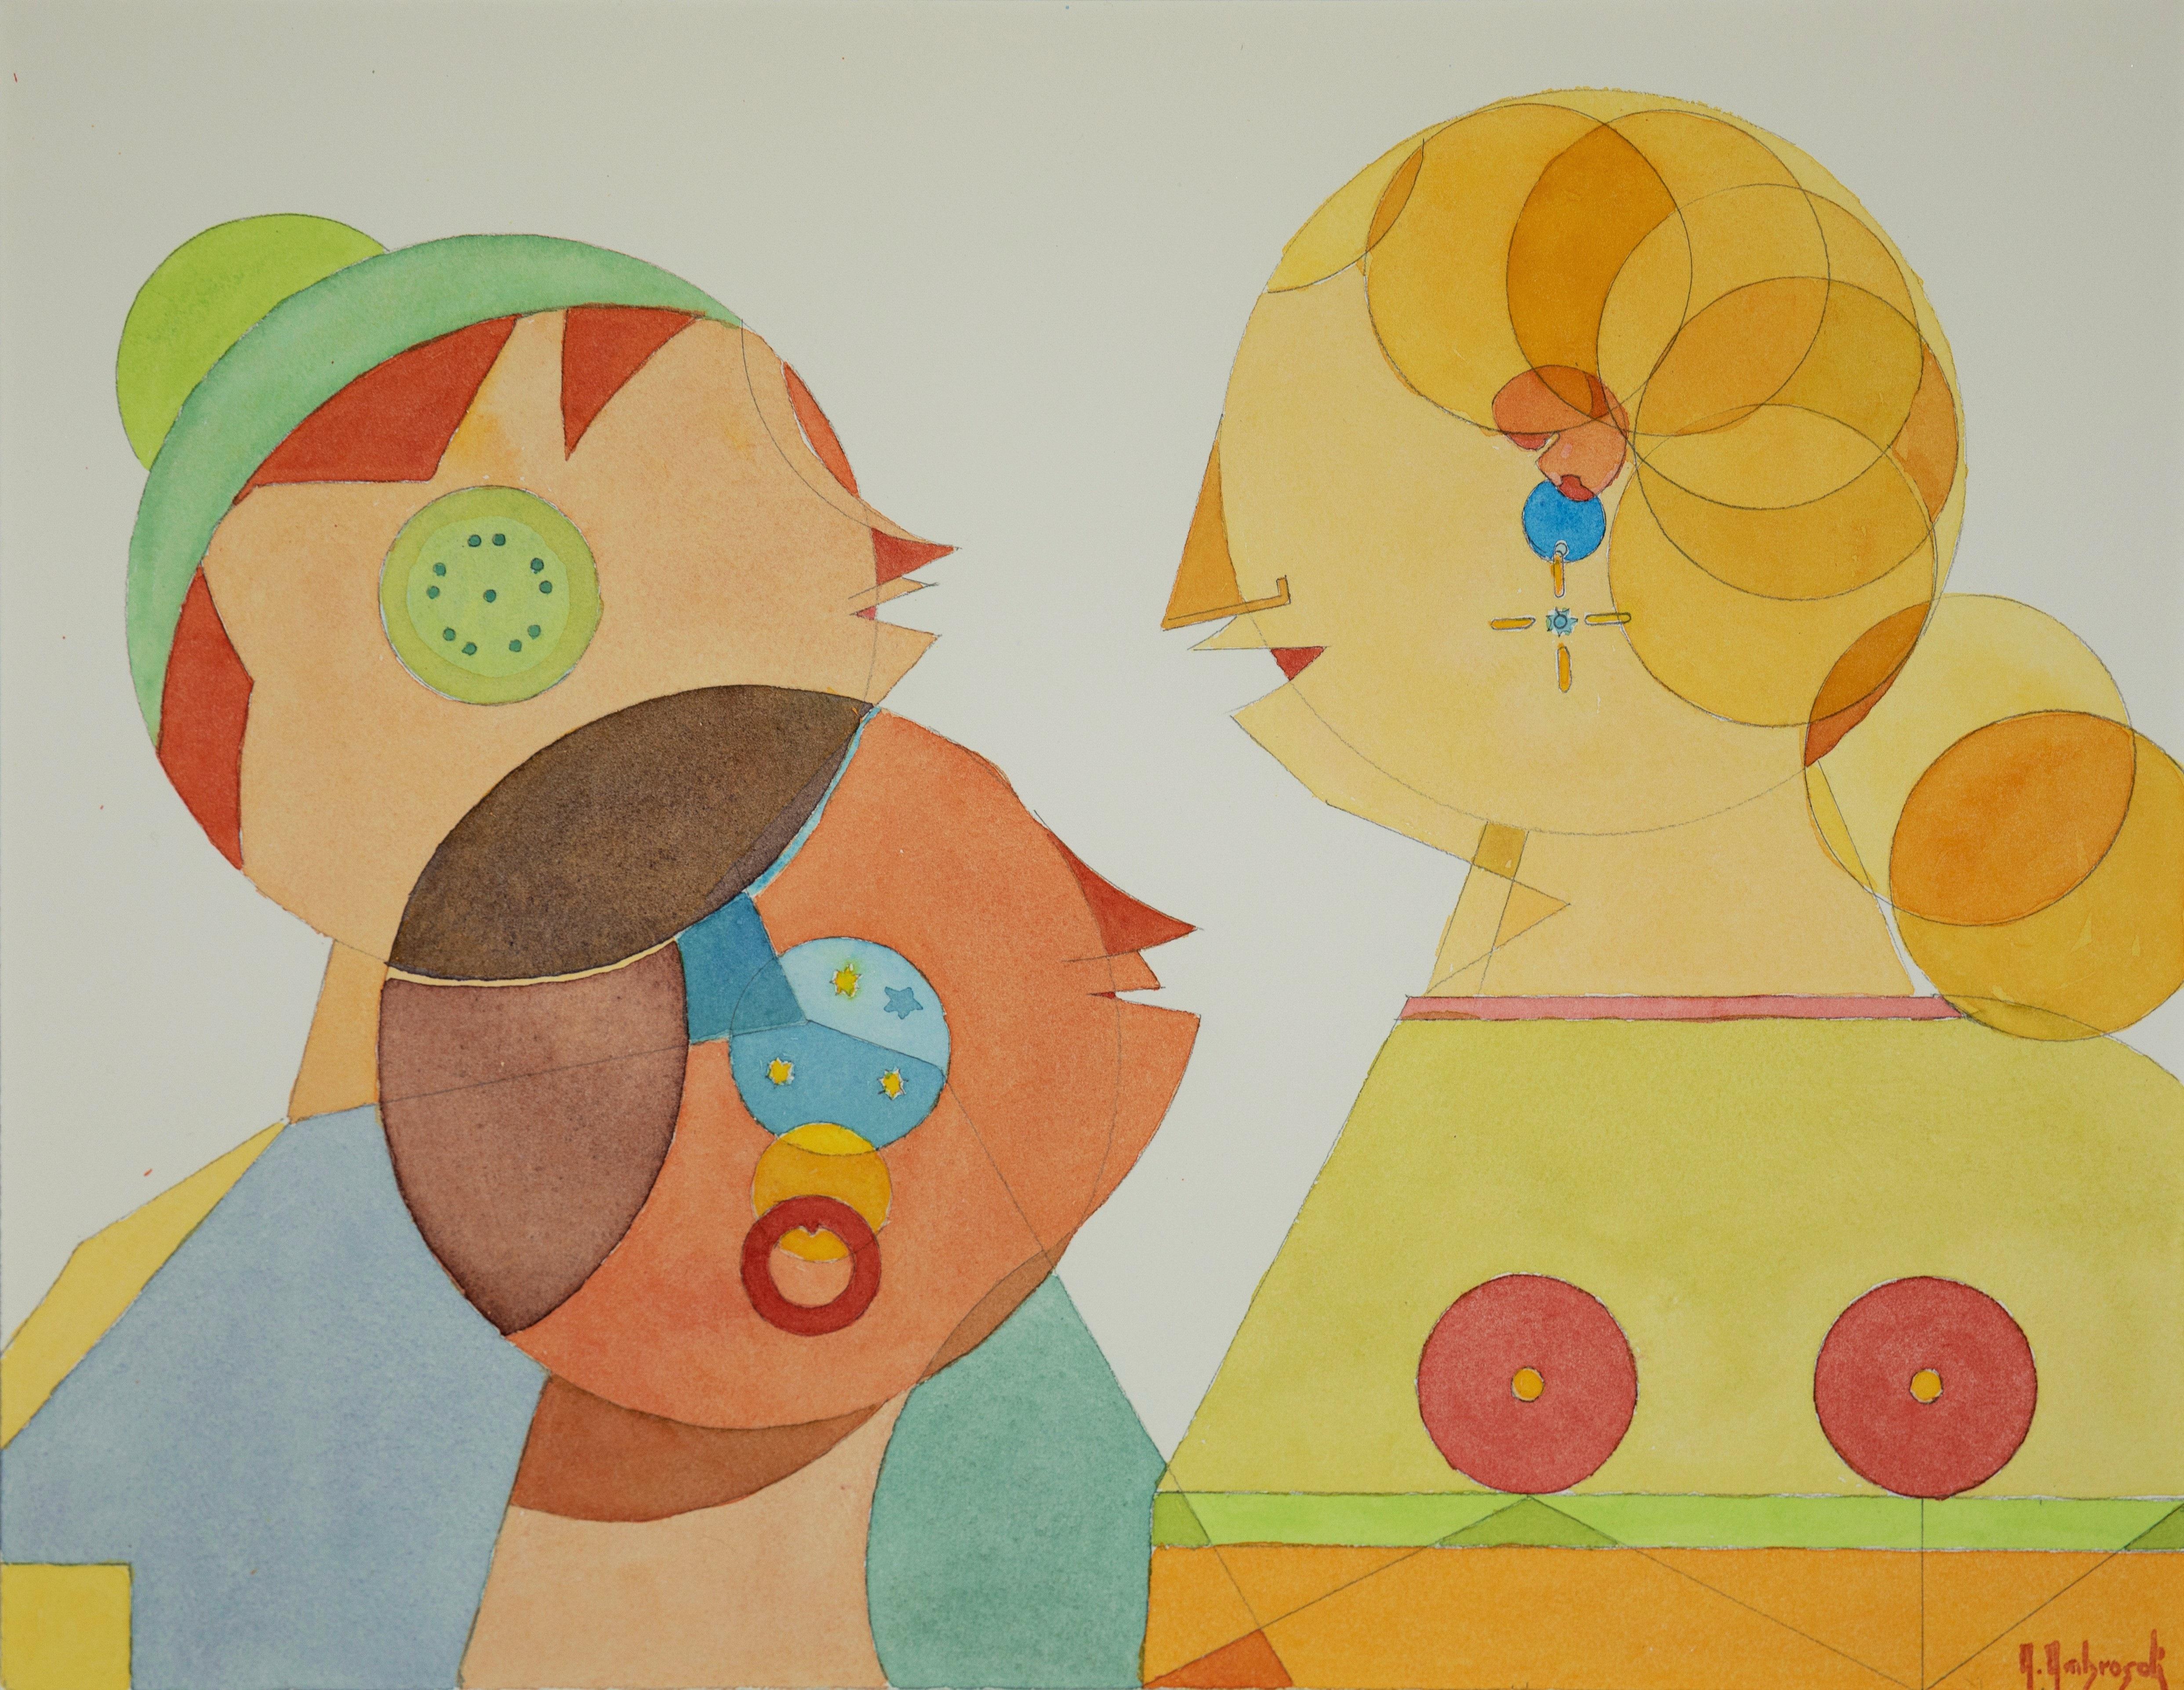 Conversation (2018), Watercolor on Paper Fabriano 600 g, cm 39x50 cm, by Italian contemporary artist Annemarie Ambrosoli (ICA - International Certified Artist)

This watercolor comes directly from the Artist's Studio

Also in this watercolor on